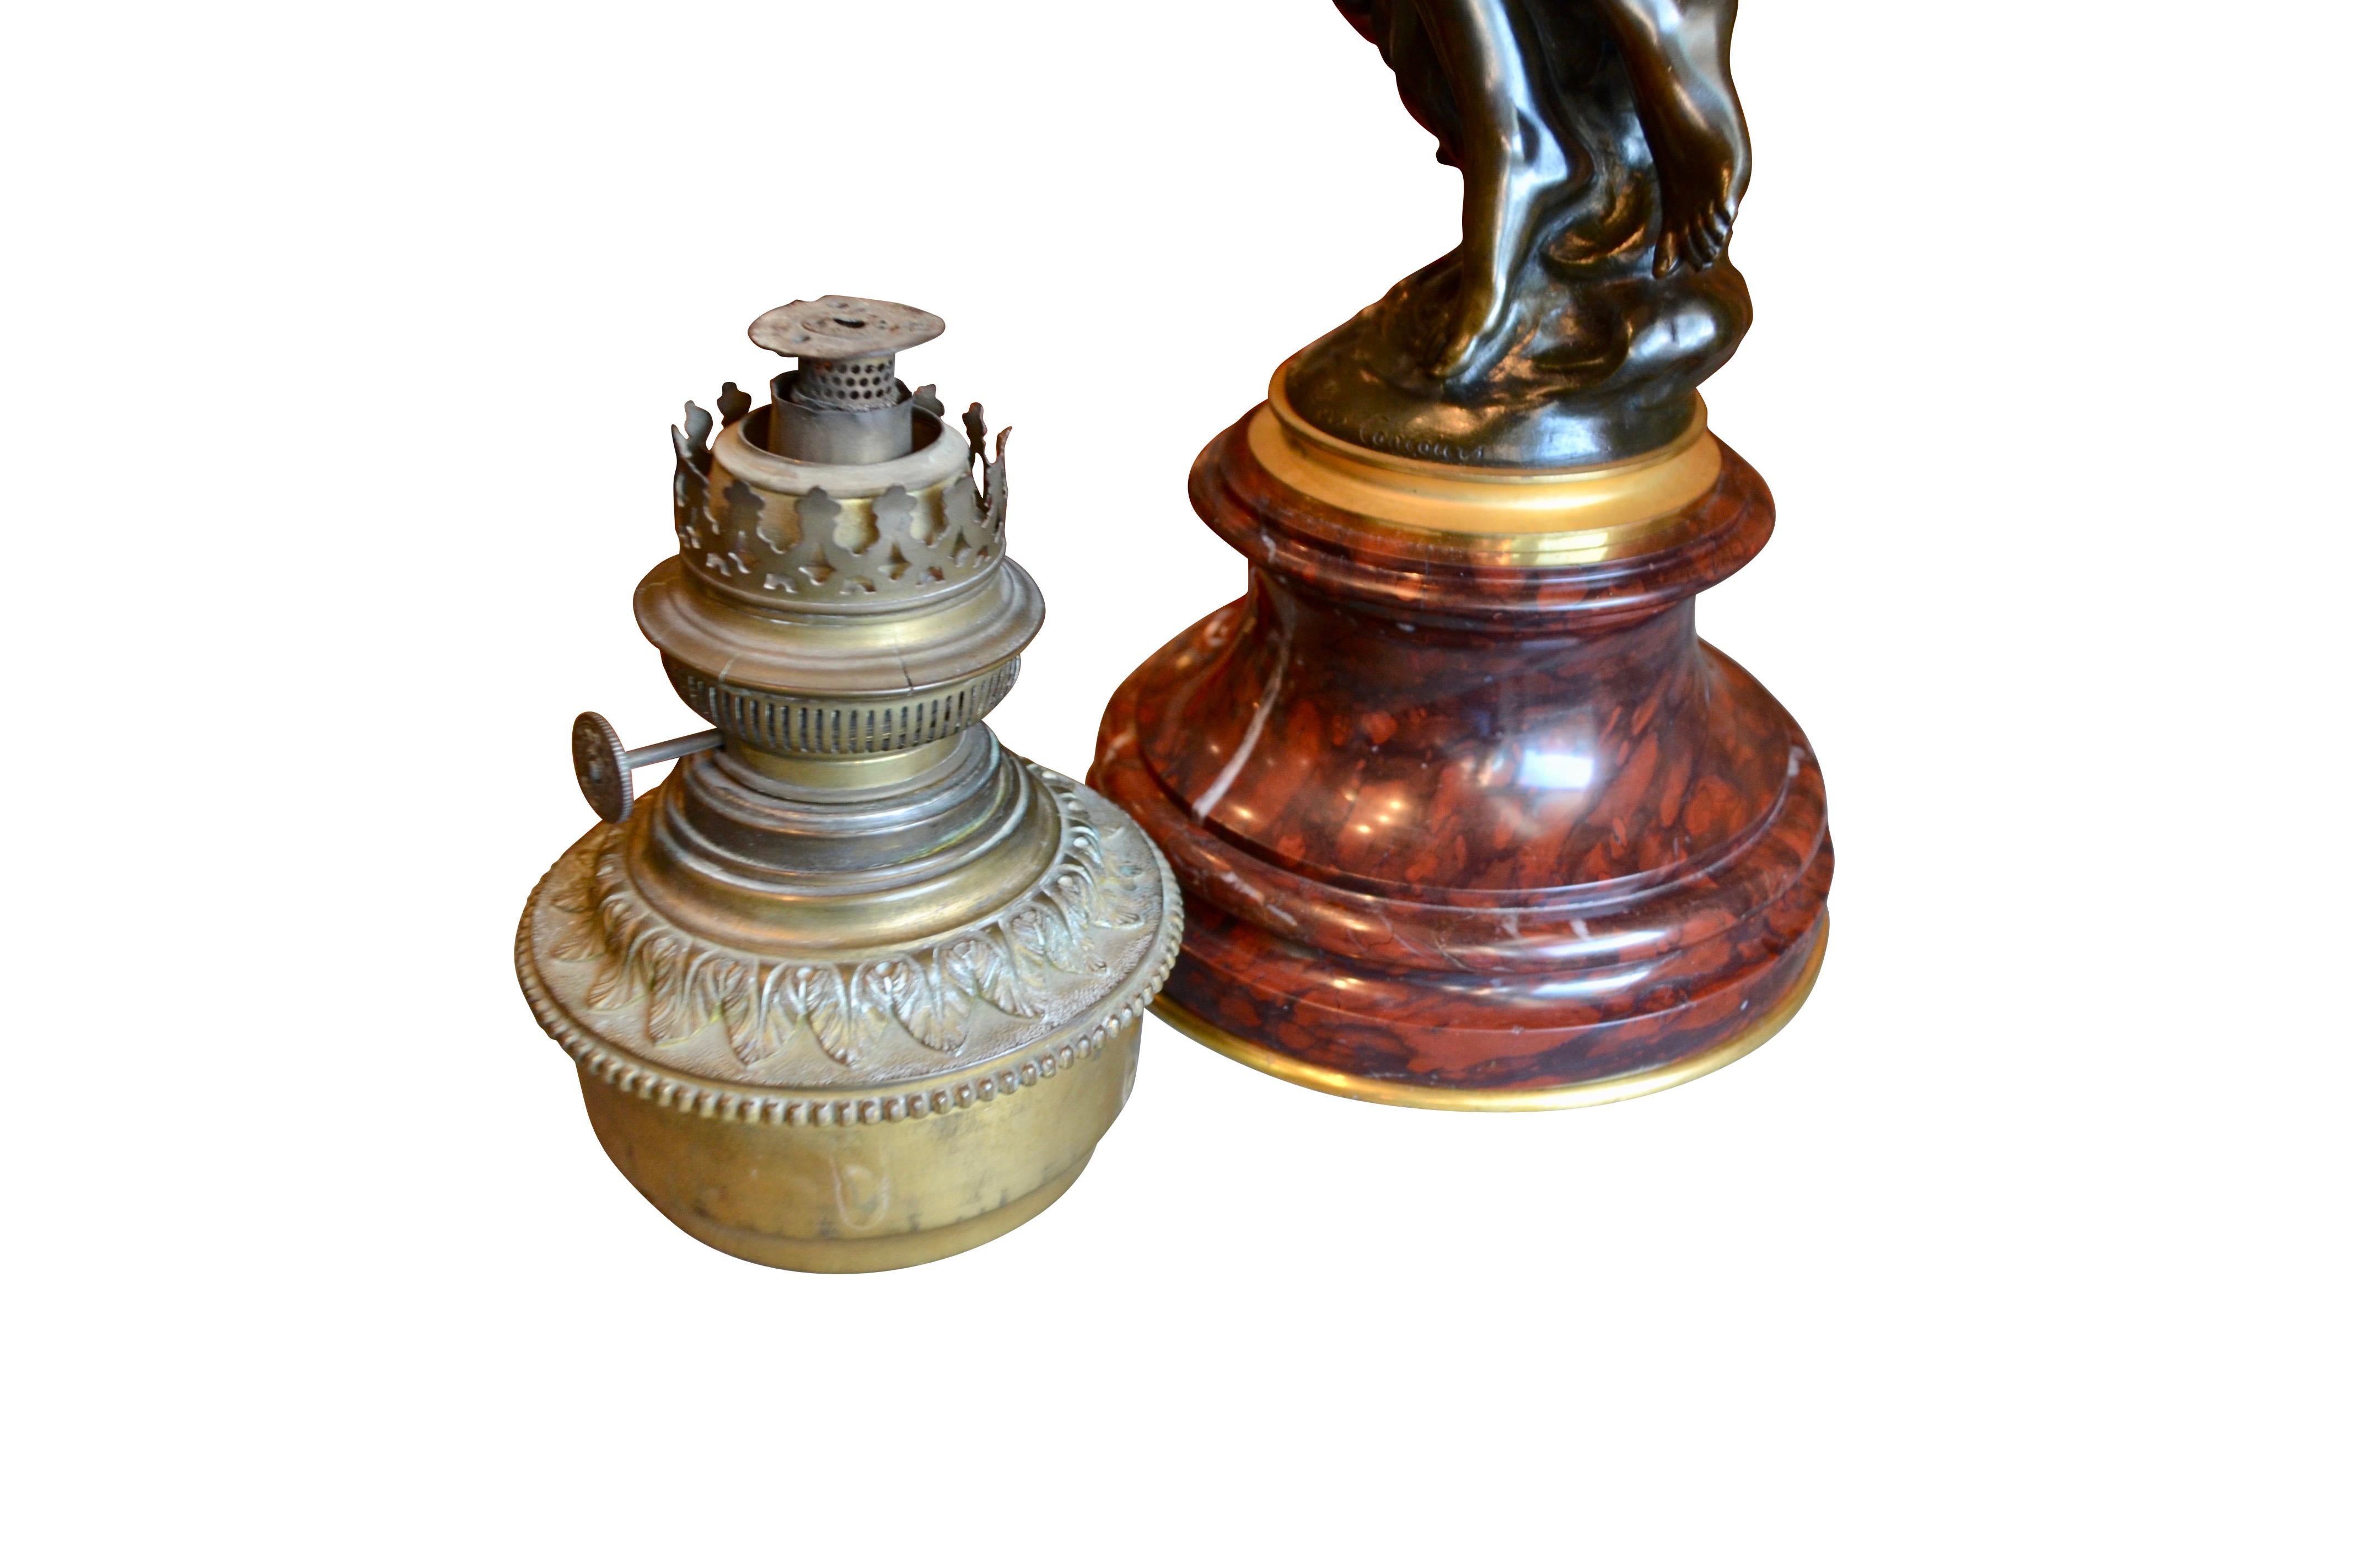  Oil Lamp Featuring a Mathurin Moreau Bronze Statue of  a Nymph and Putto   For Sale 4